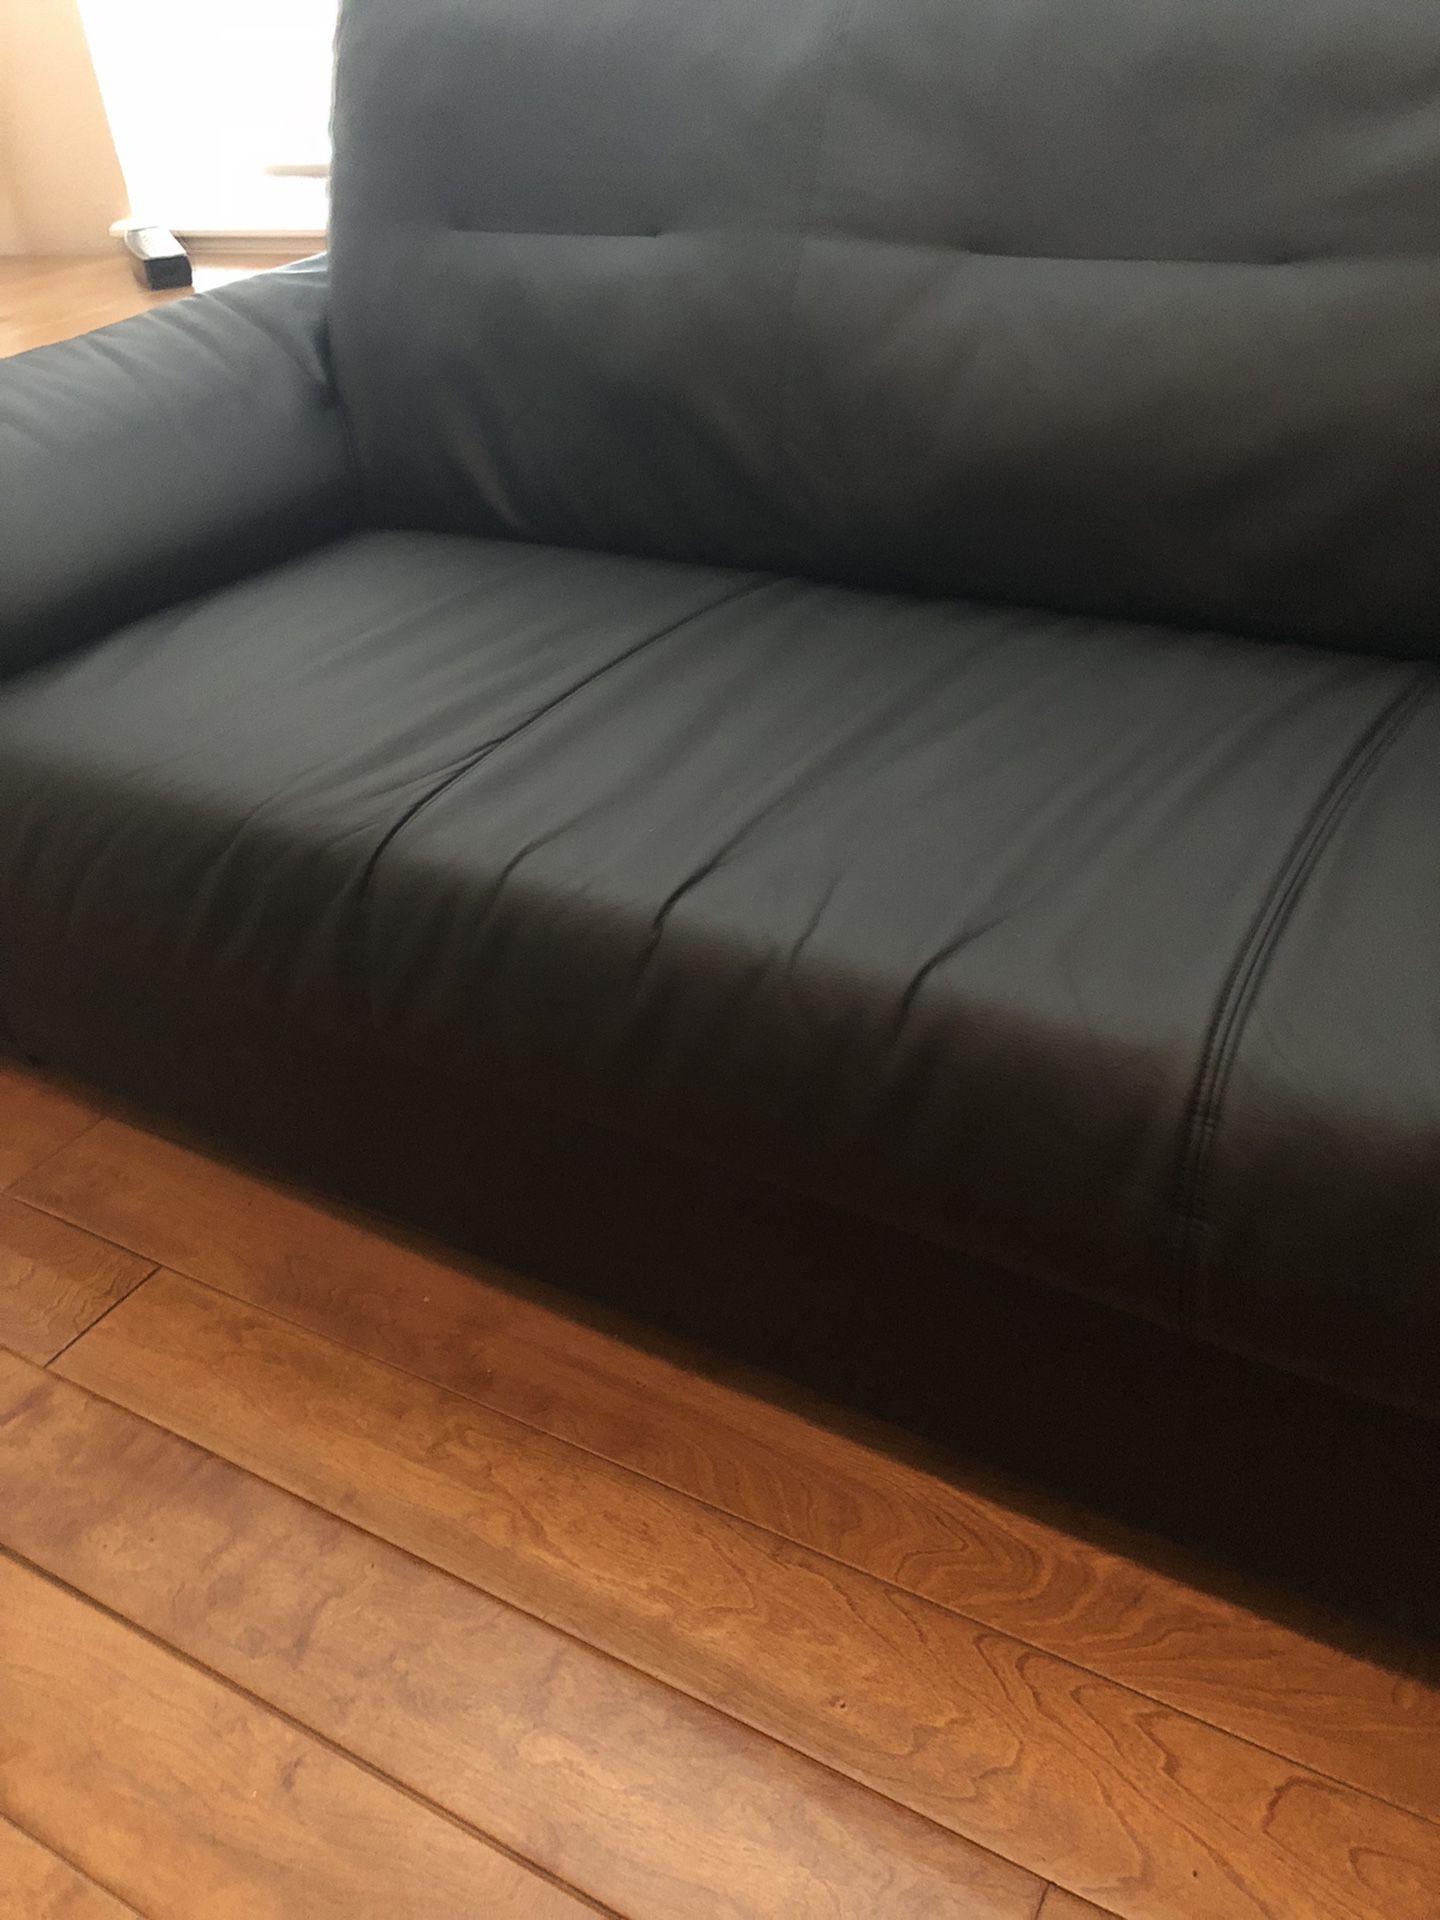 IKEA Couch for a Good Home